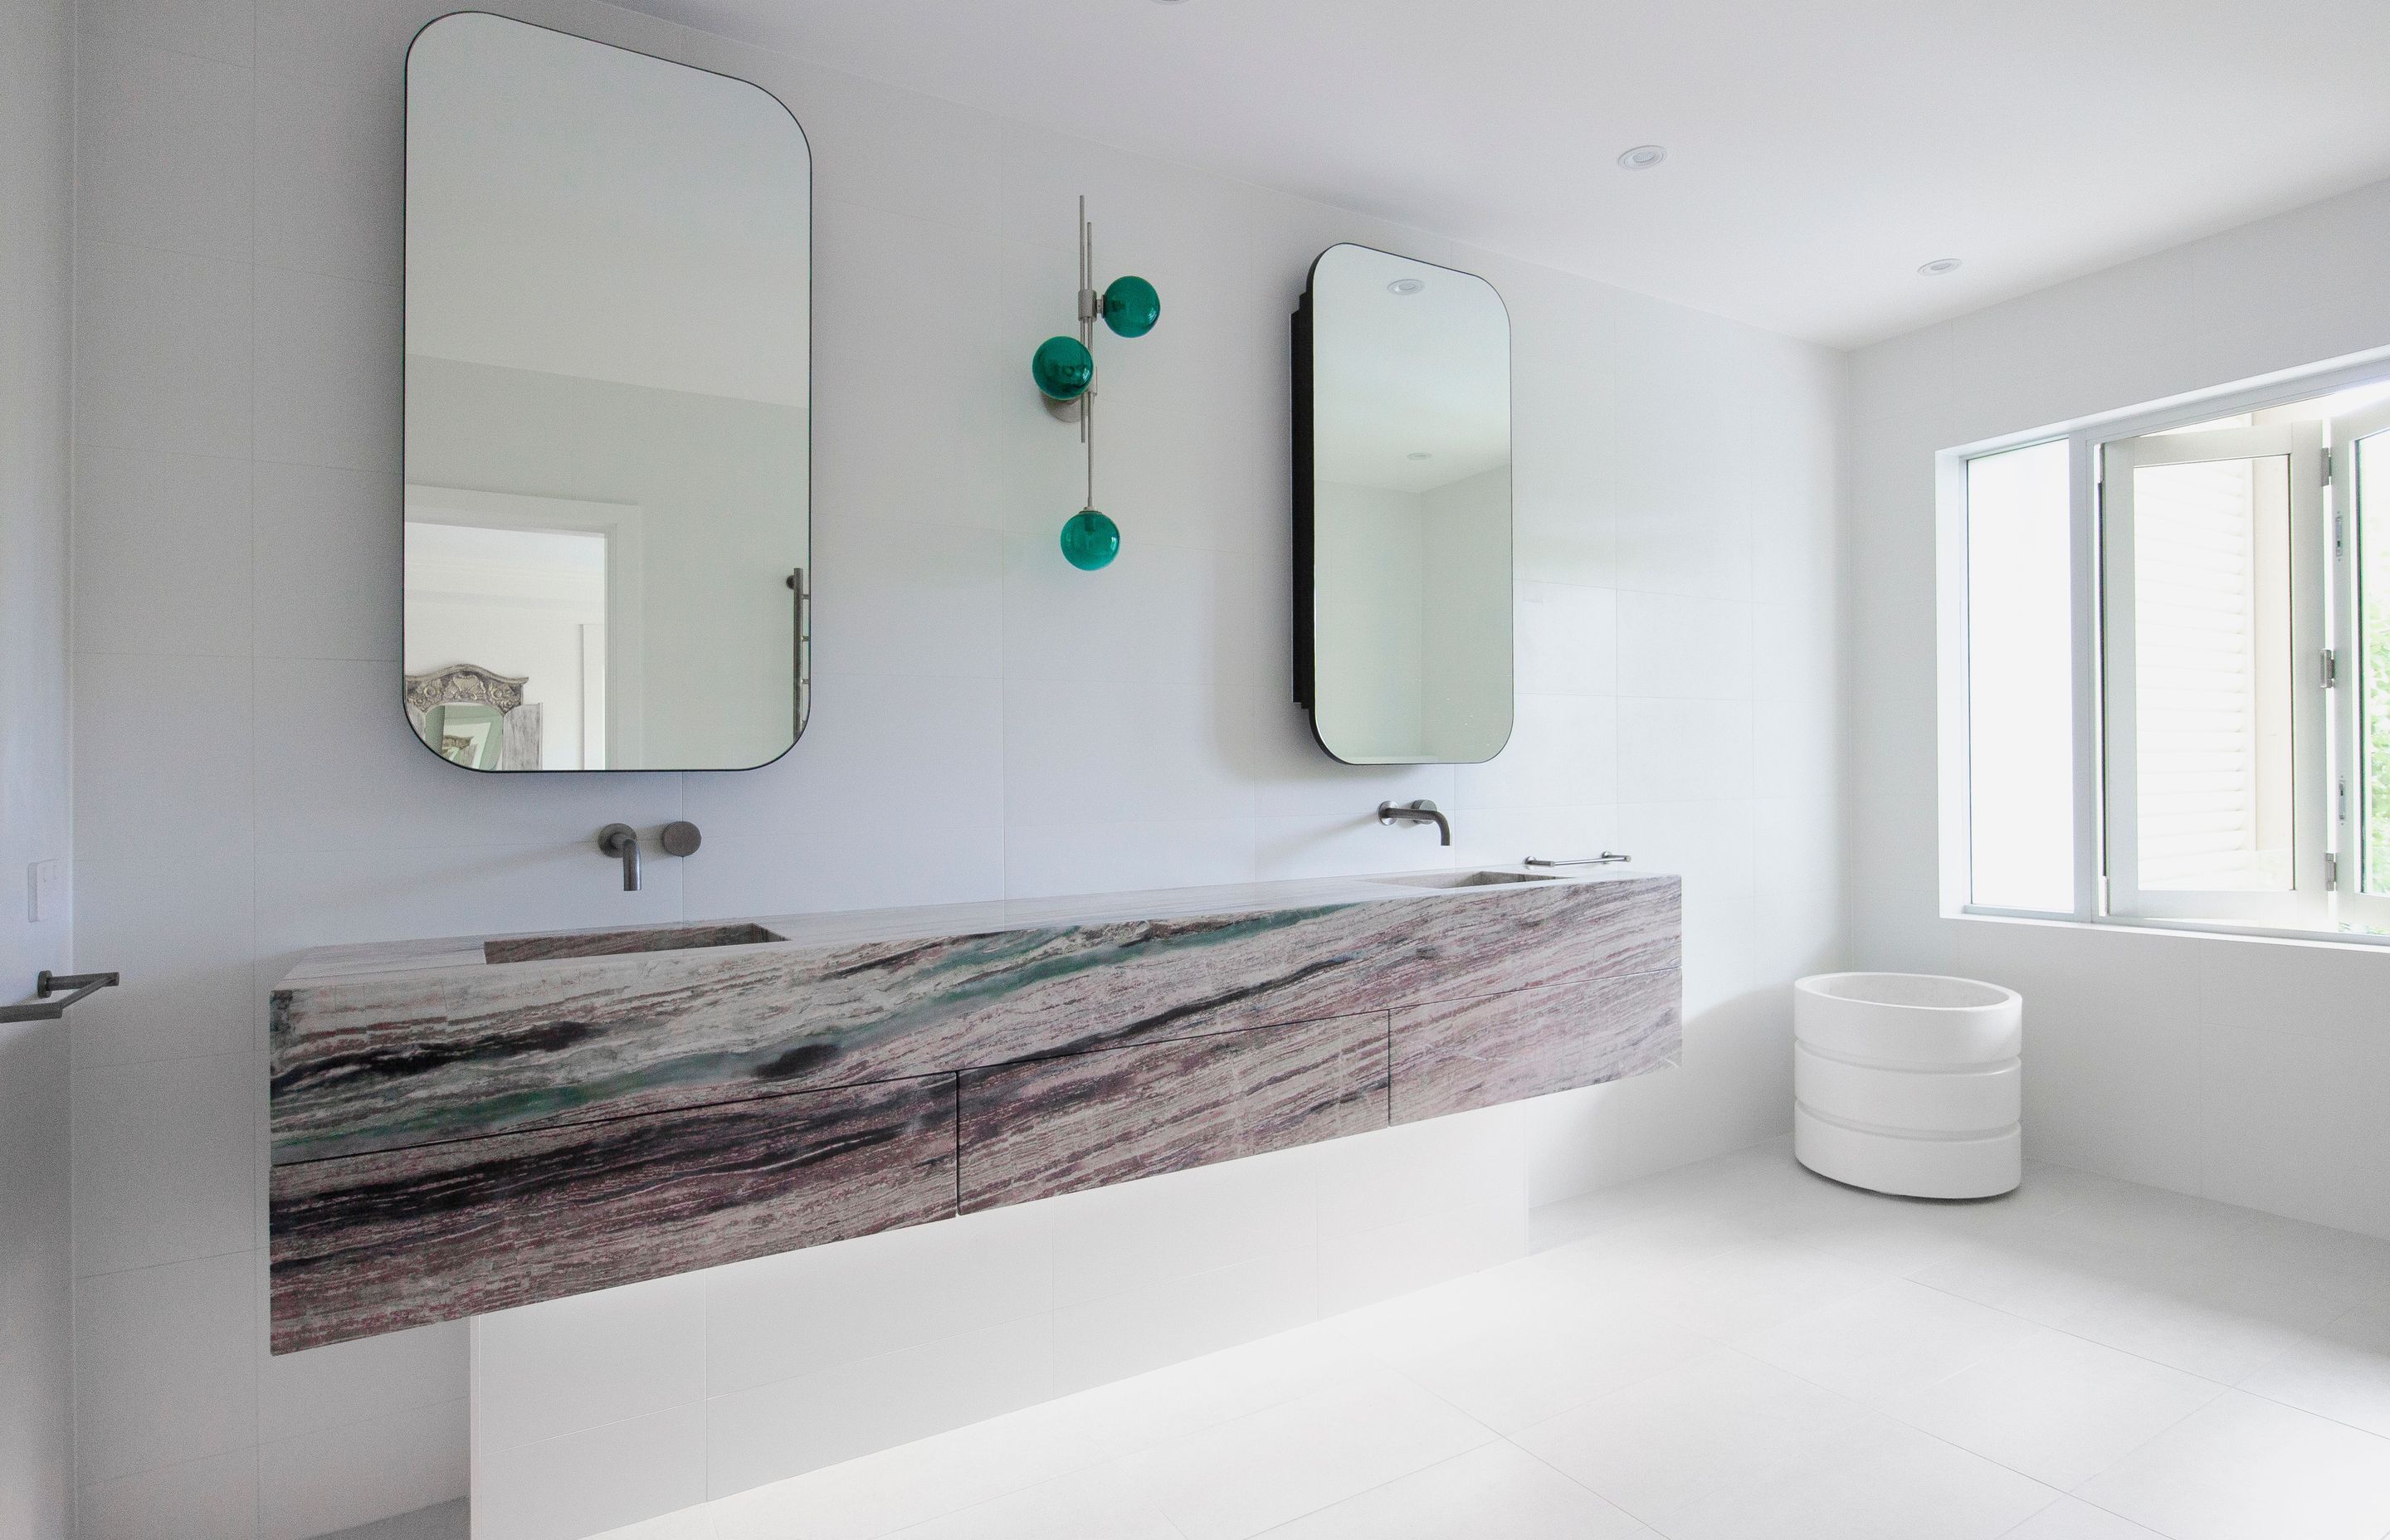 Skheme's Ruby slabs feature in this Mosman home.